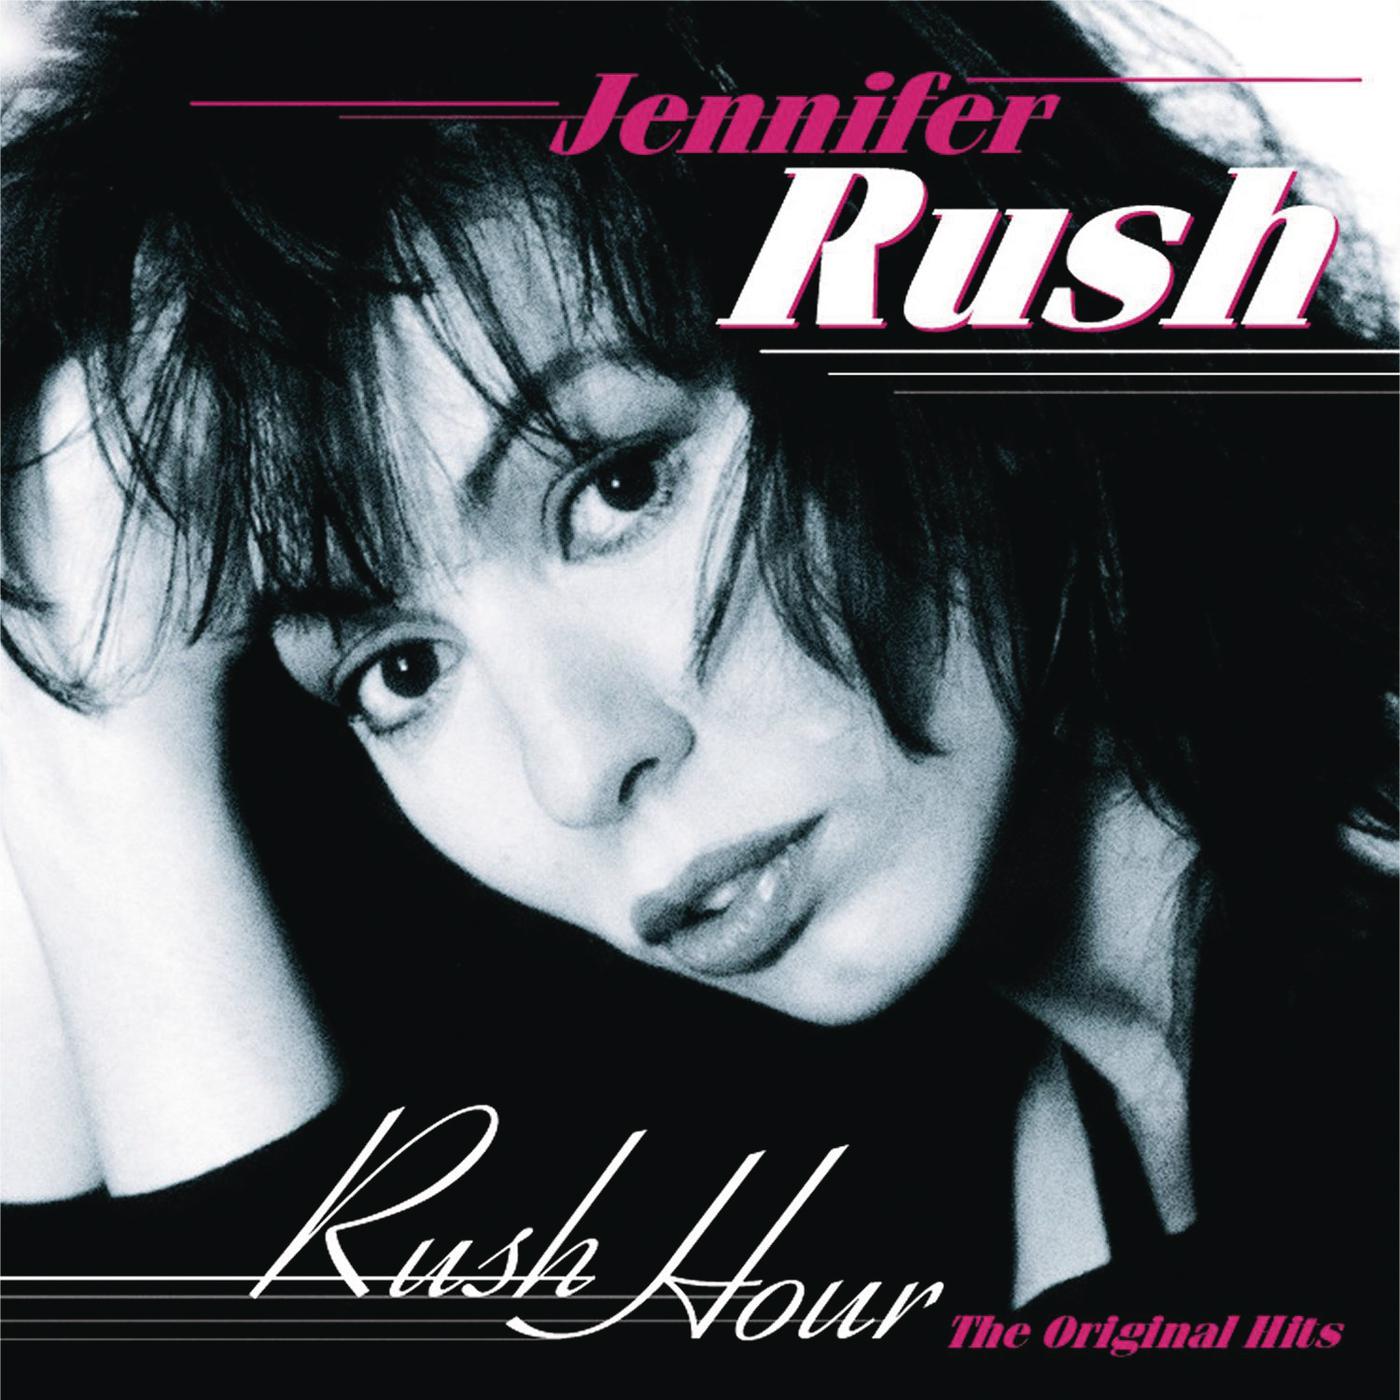 Jennifer Rush - Love Is the Language (Of the Heart)